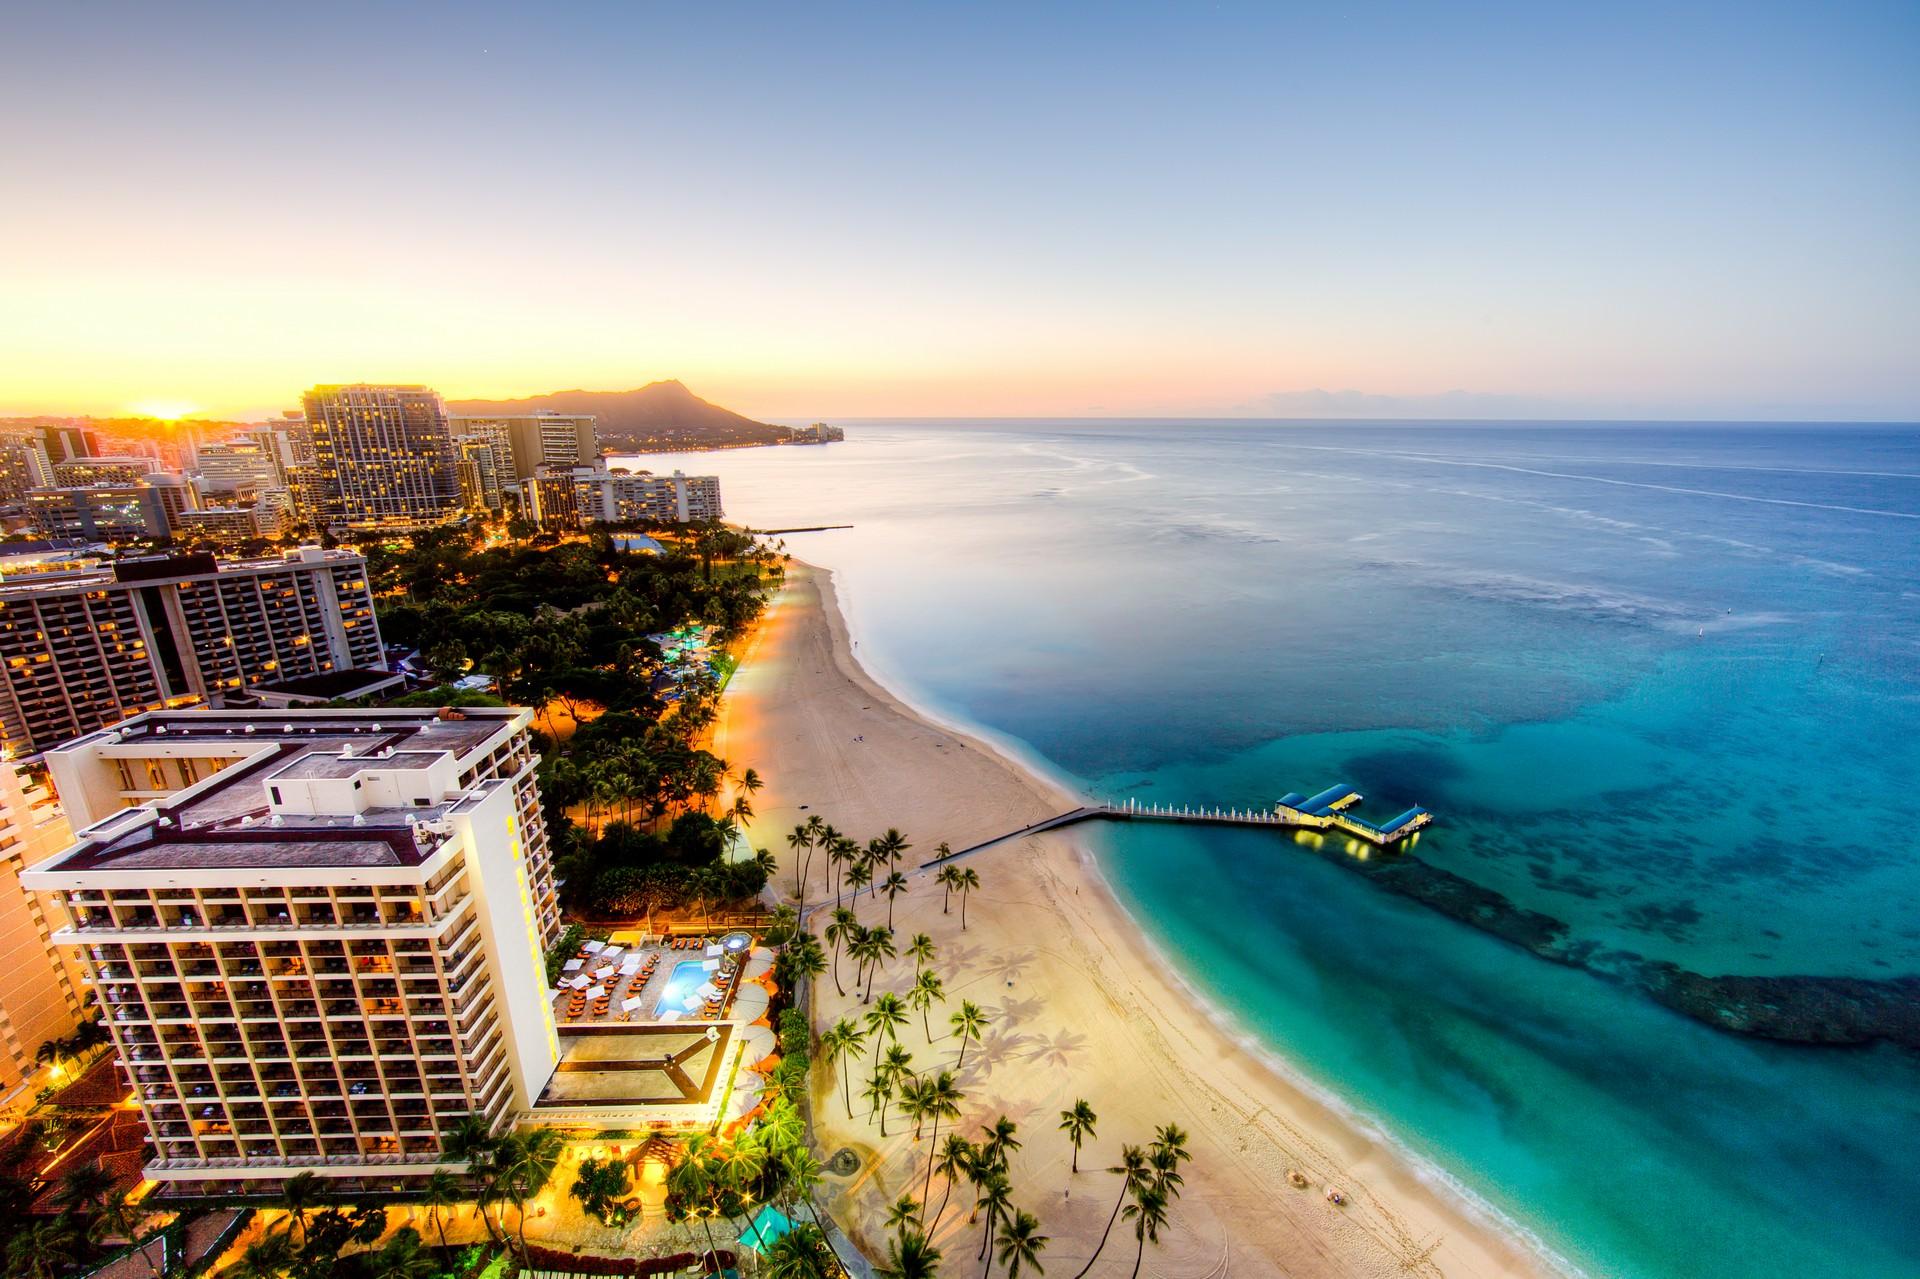 Nice beach by the sea with turquise water in Waikiki at sunset time